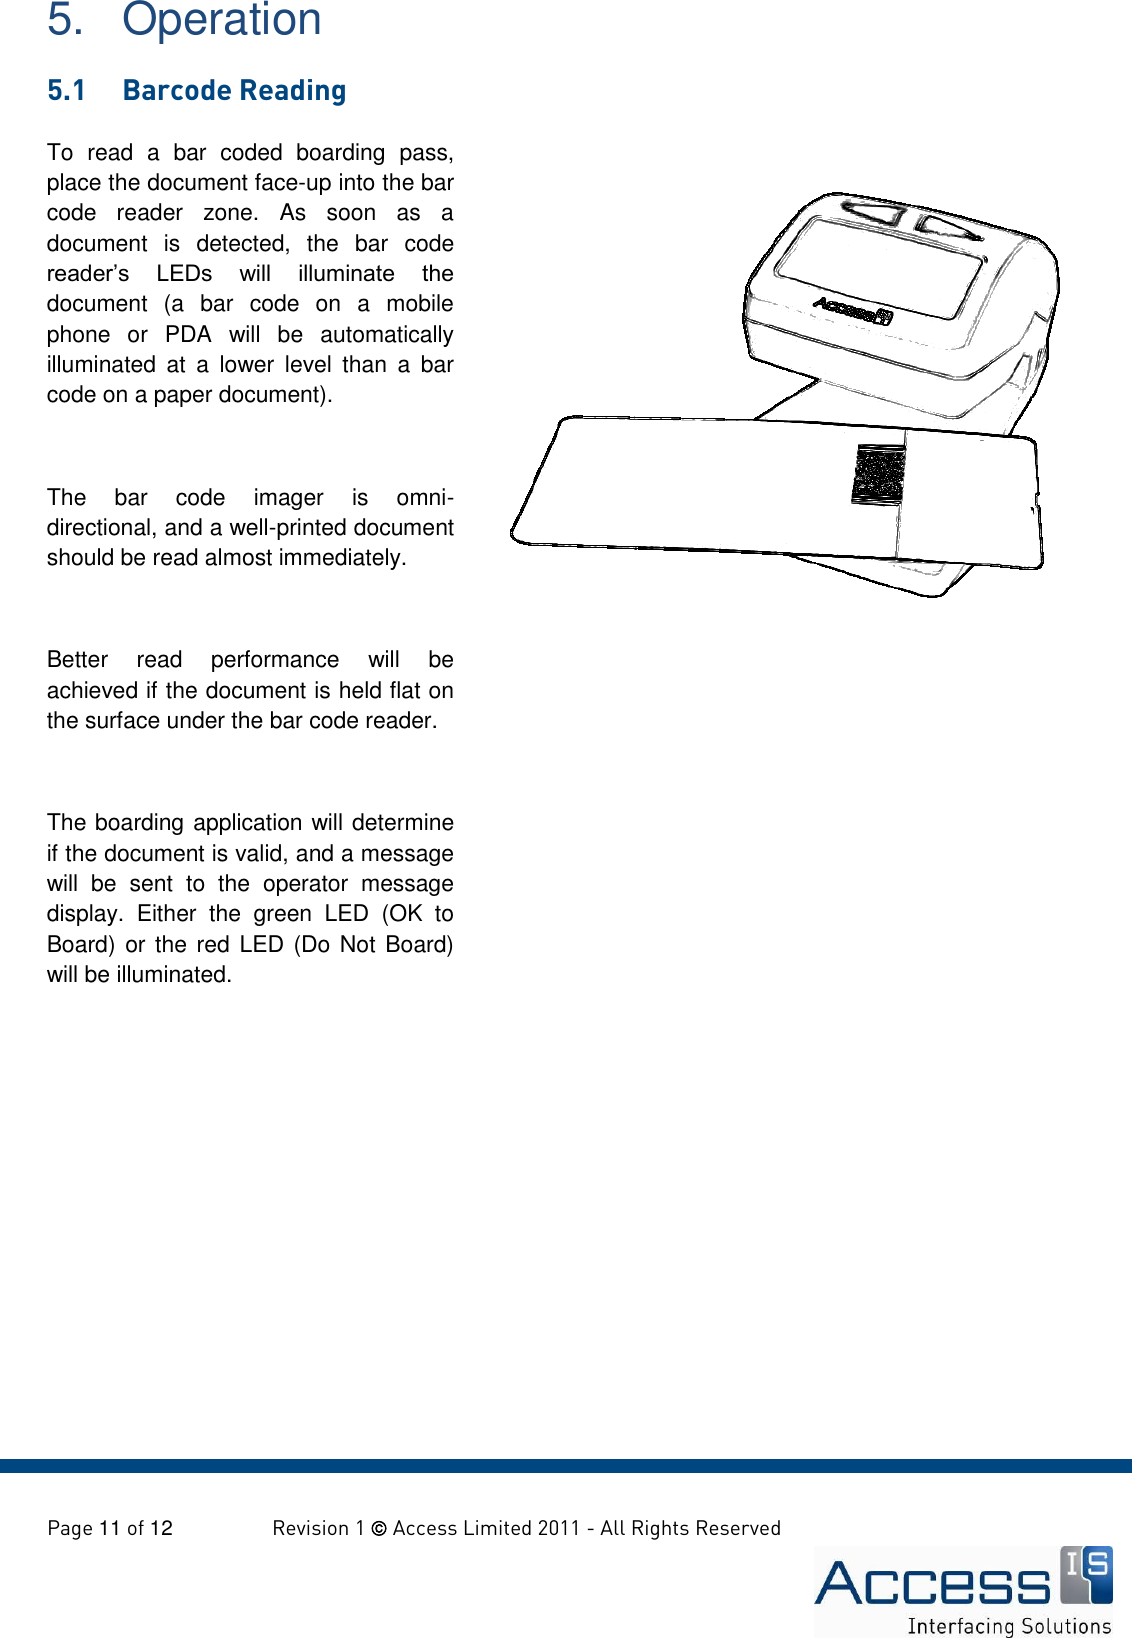   Page 11 of 12        Revision 1  Access Limited 2011 - All Rights Reserved   To  read  a  bar  coded  boarding  pass, place the document face-up into the bar code  reader  zone.  As  soon  as  a document  is  detected,  the  bar  code reader’s  LEDs  will  illuminate  the document  (a  bar  code  on  a  mobile phone  or  PDA  will  be  automatically illuminated  at  a  lower  level  than  a  bar code on a paper document).  The  bar  code  imager  is  omni-directional, and a well-printed document should be read almost immediately.  Better  read  performance  will  be achieved if the document is held flat on the surface under the bar code reader.  The boarding application will determine if the document is valid, and a message will  be  sent  to  the  operator  message display.  Either  the  green  LED  (OK  to Board) or the red LED (Do Not  Board) will be illuminated.  5.  Operation 5.1  Barcode Reading   